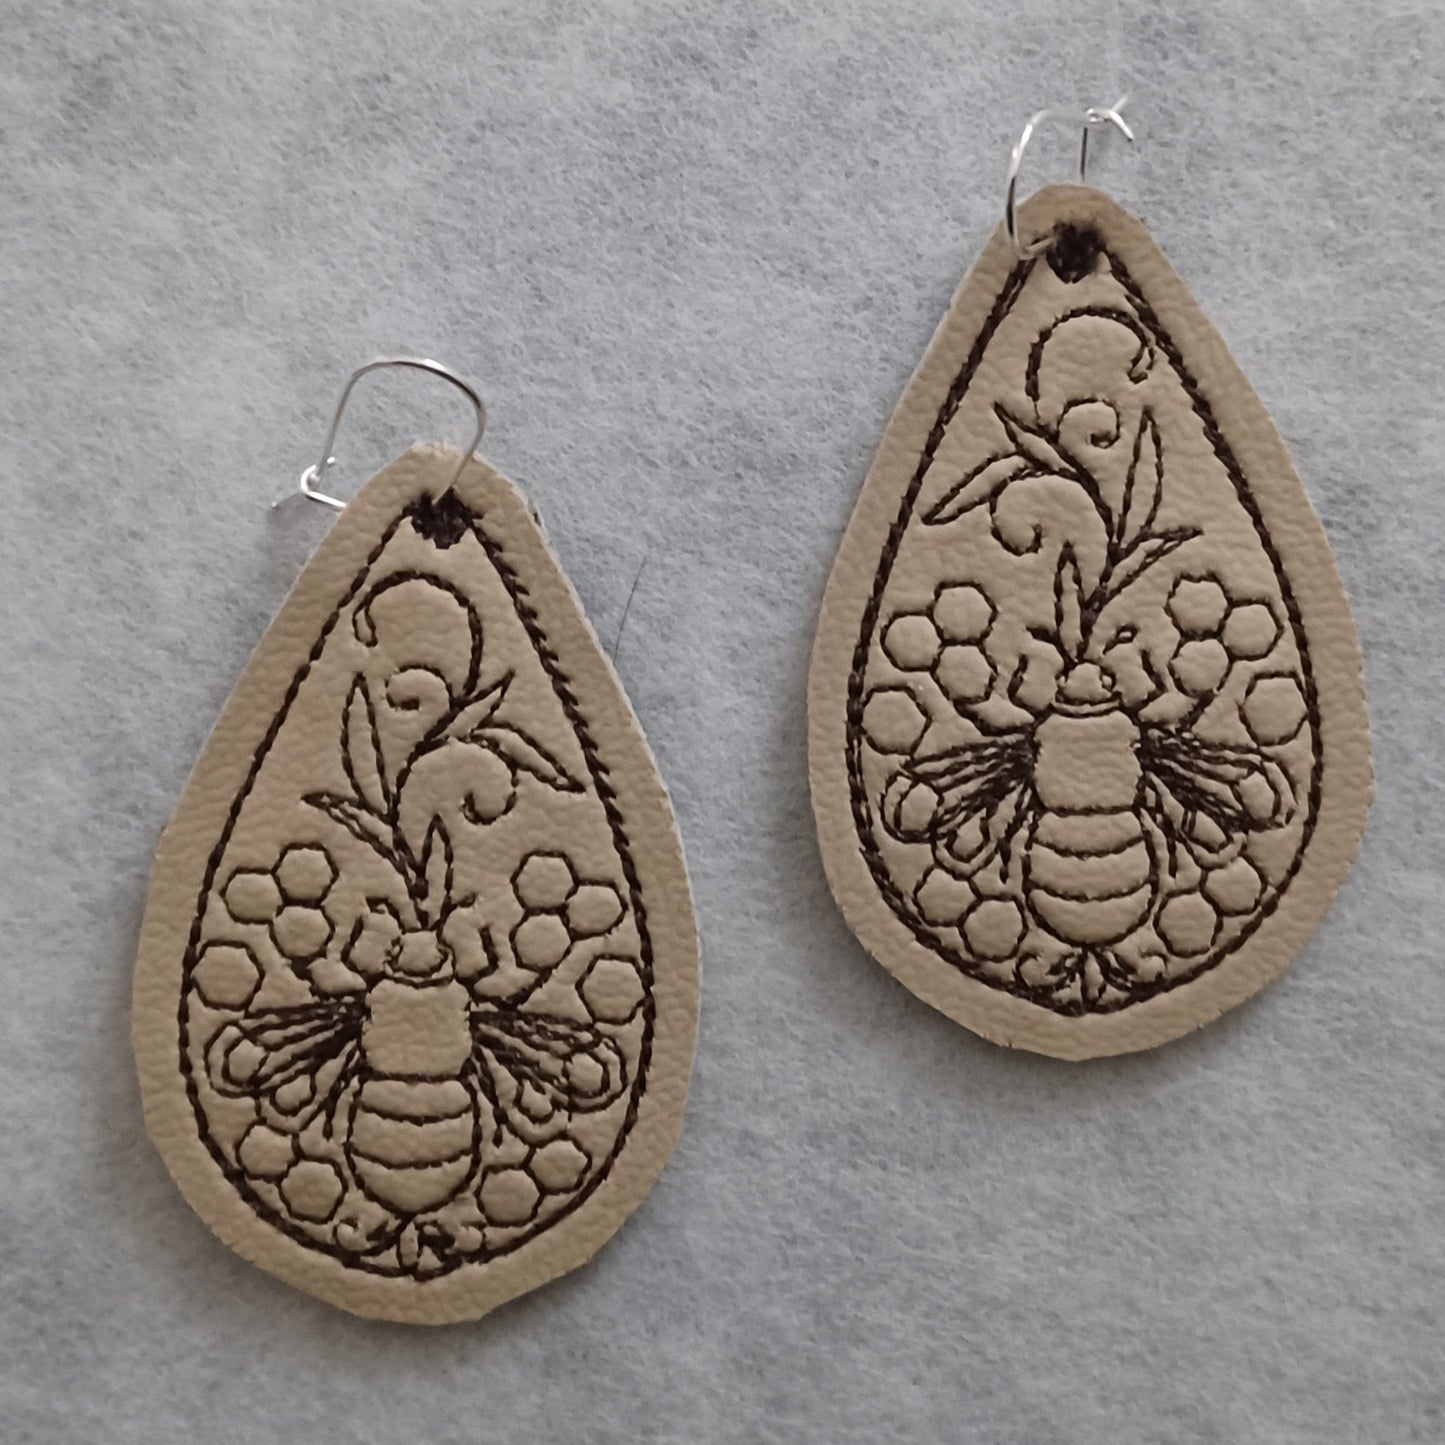 Bumble Bee Embroidered Earrings